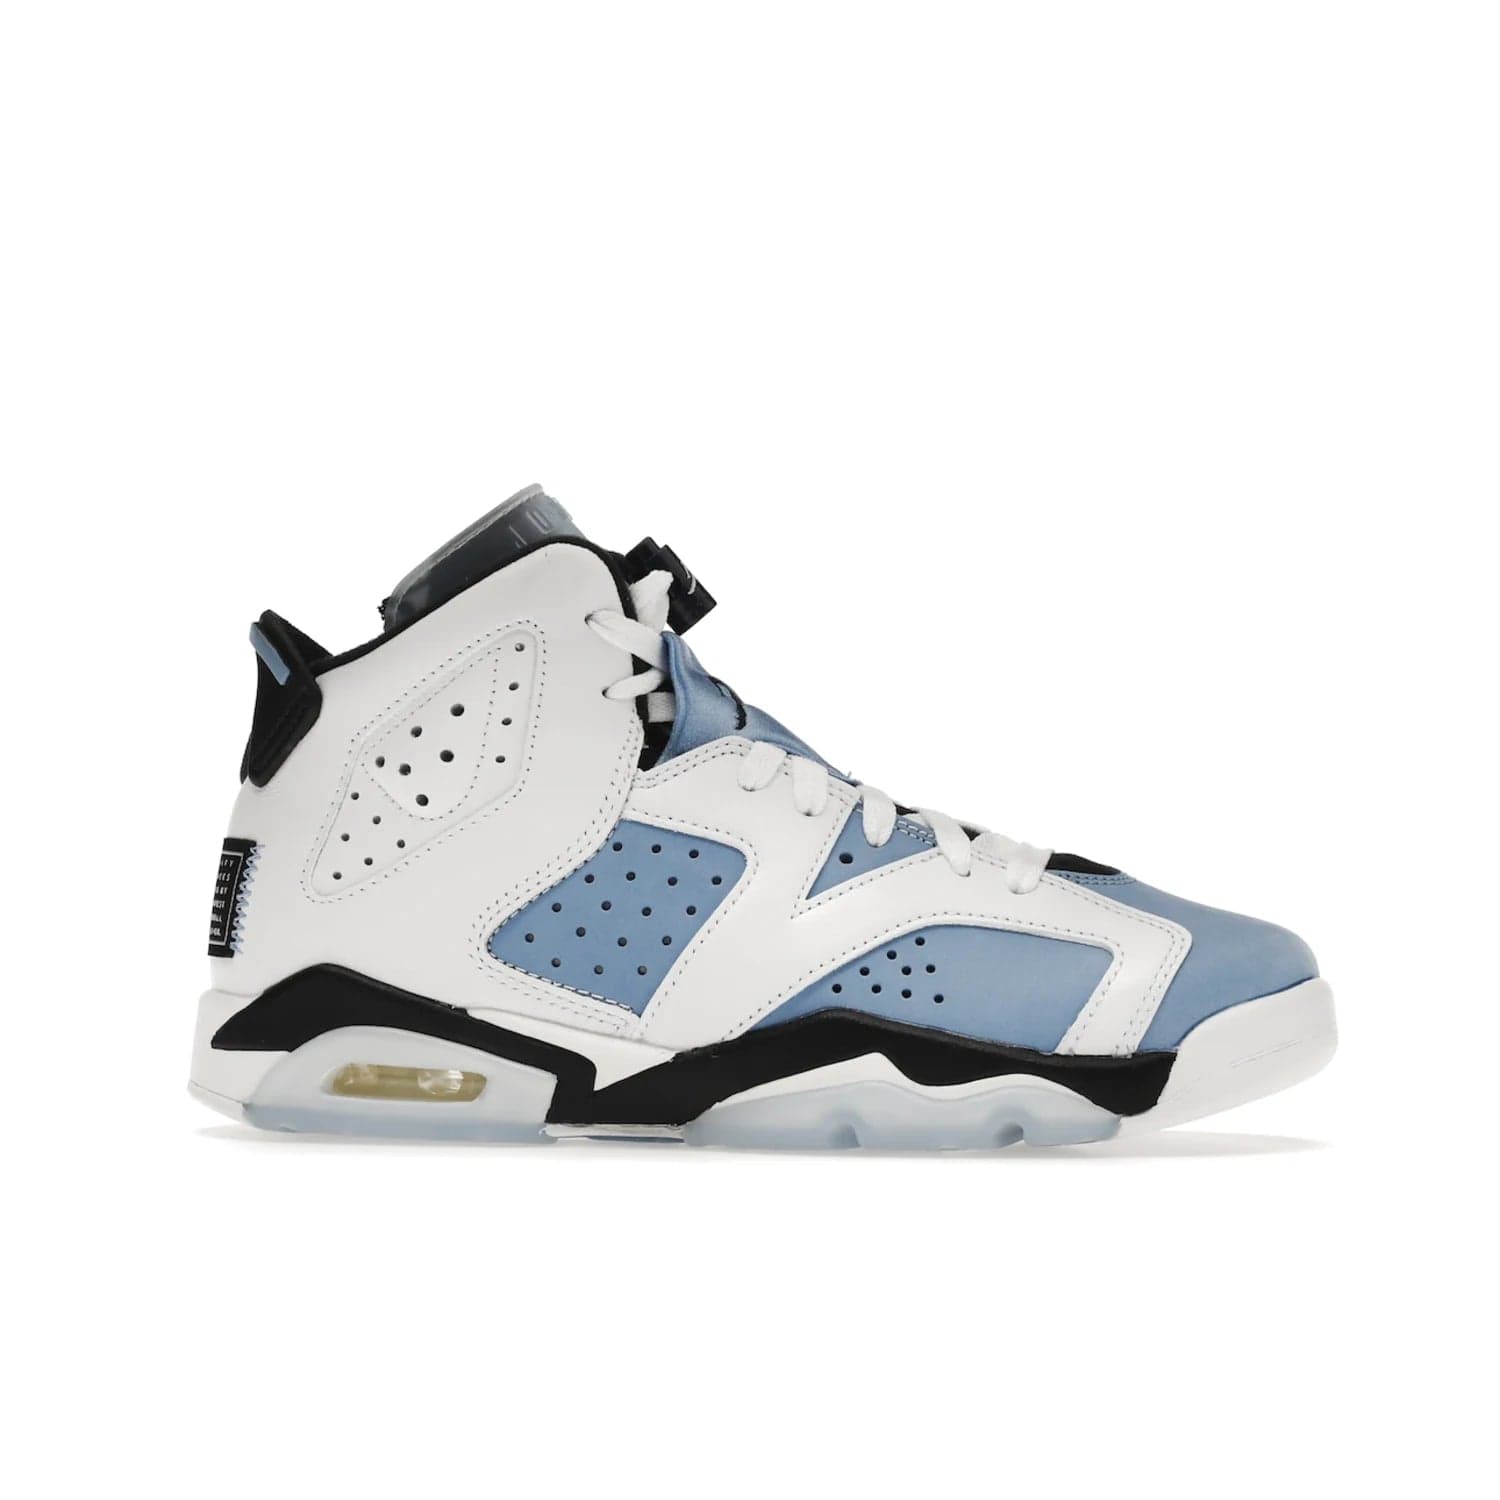 Jordan 6 Retro UNC White (GS) - Image 2 - Only at www.BallersClubKickz.com - Air Jordan 6 Retro UNC White GS: Michael Jordan alma mater, UNC Tar Heels, featuring colorway, nubuck, leather, Jumpman branding and a visible Air unit. Translucent blue/white outsole, perfect for completing sneaker rotation.